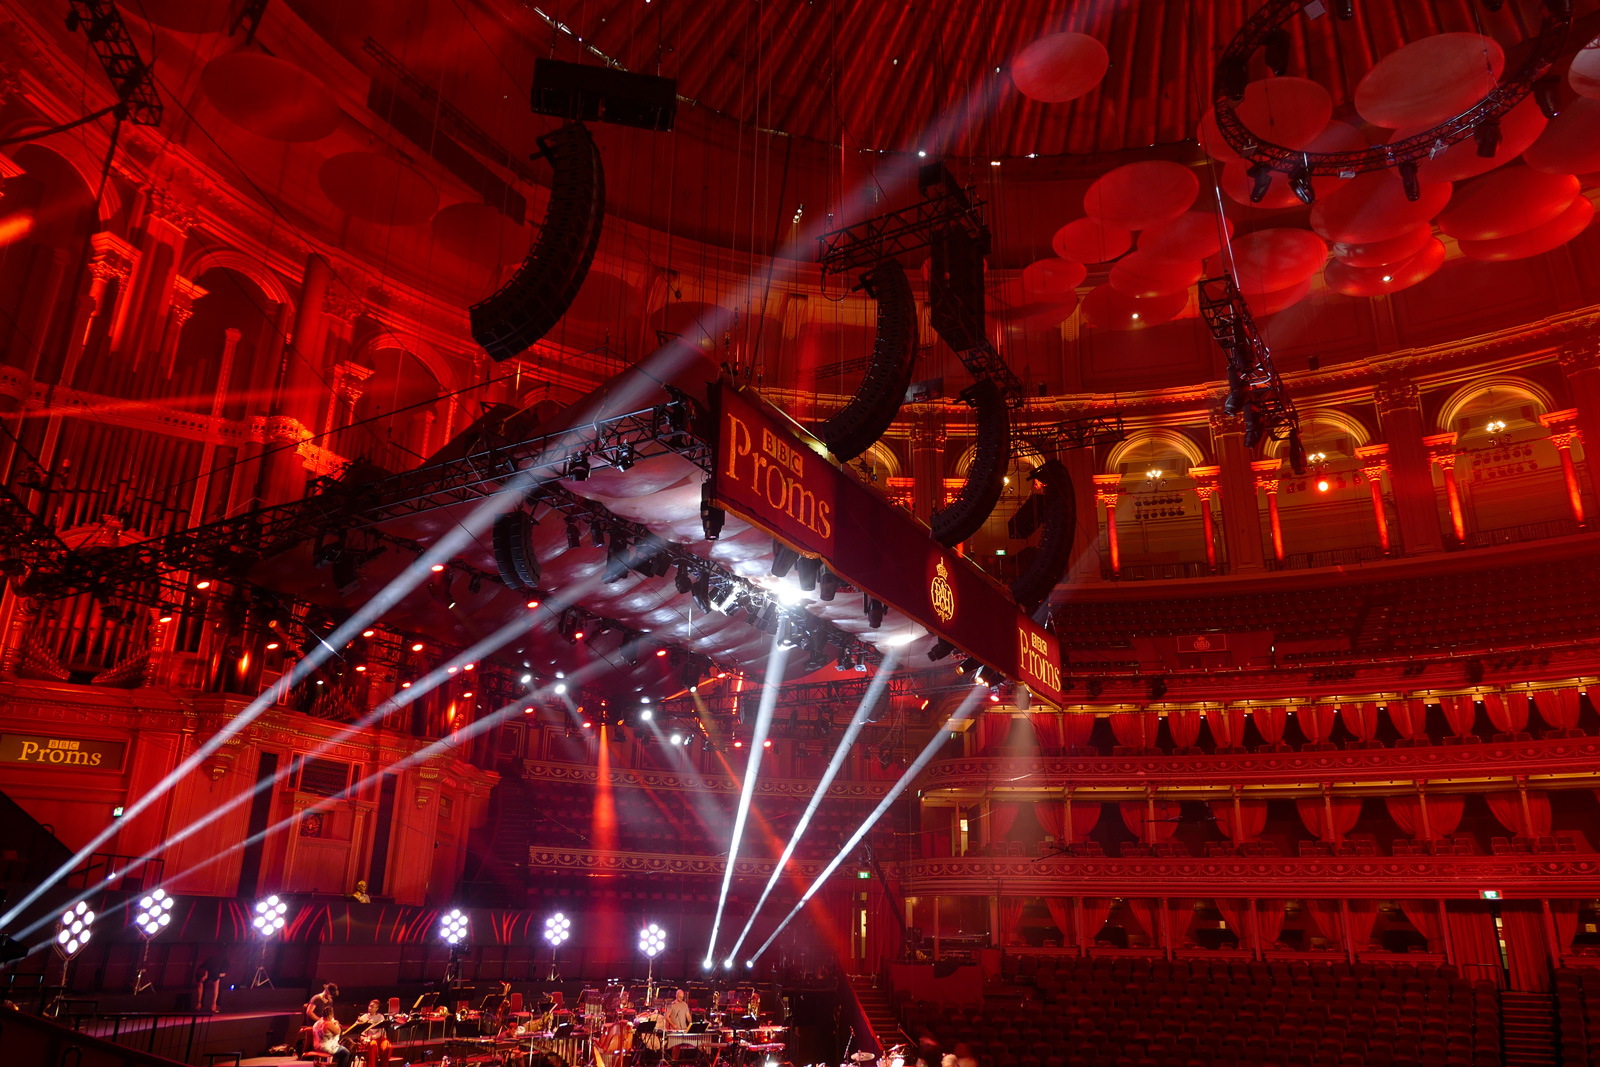 L-ISA Returns To Royal Albert Hall For BBC Proms